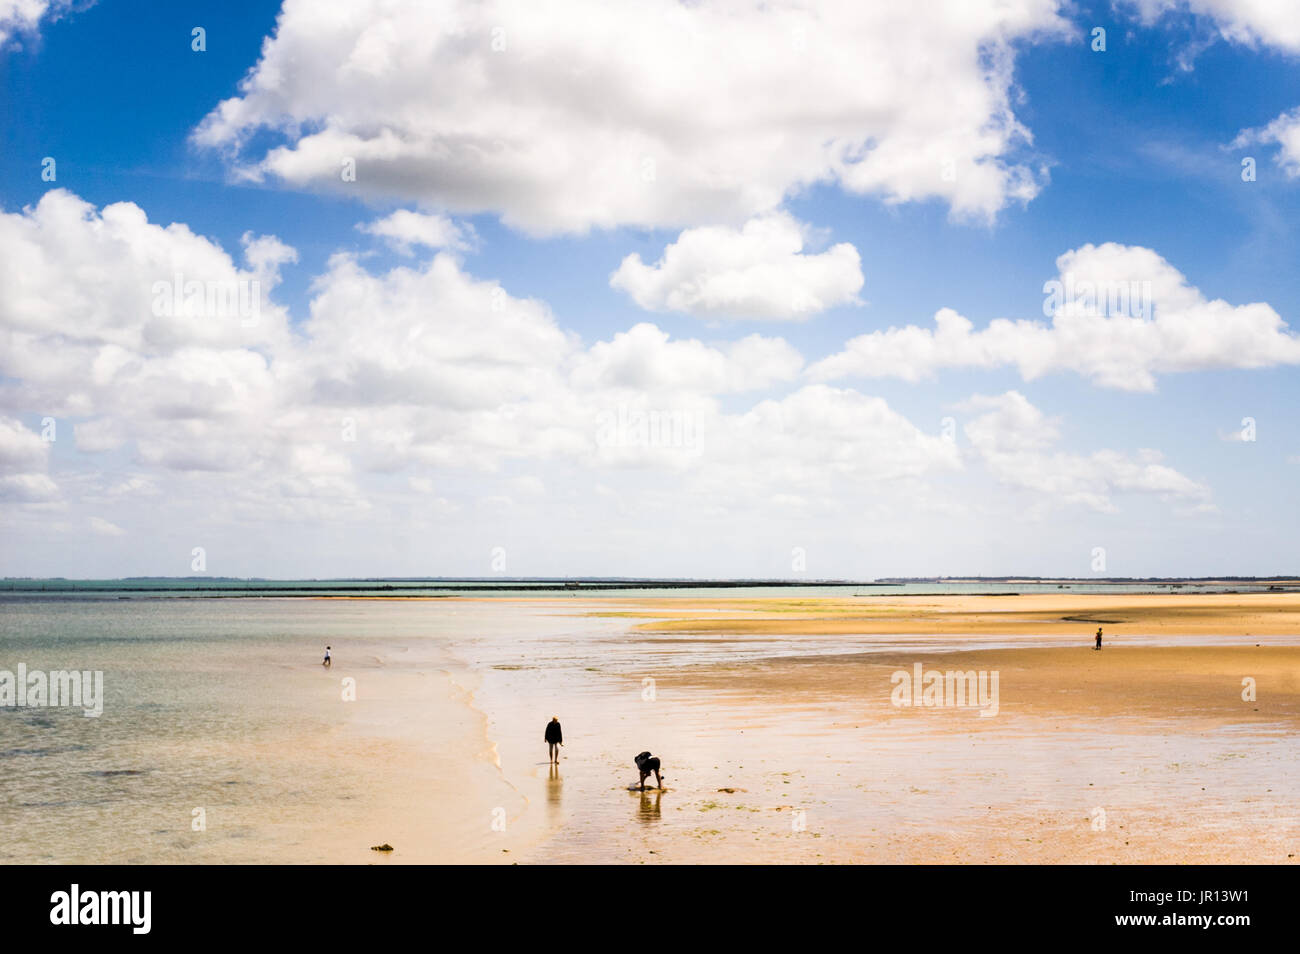 Seashore at low tide with people cockle picking and strolling on the beach under a blue sky full of heavy white clouds. Stock Photo